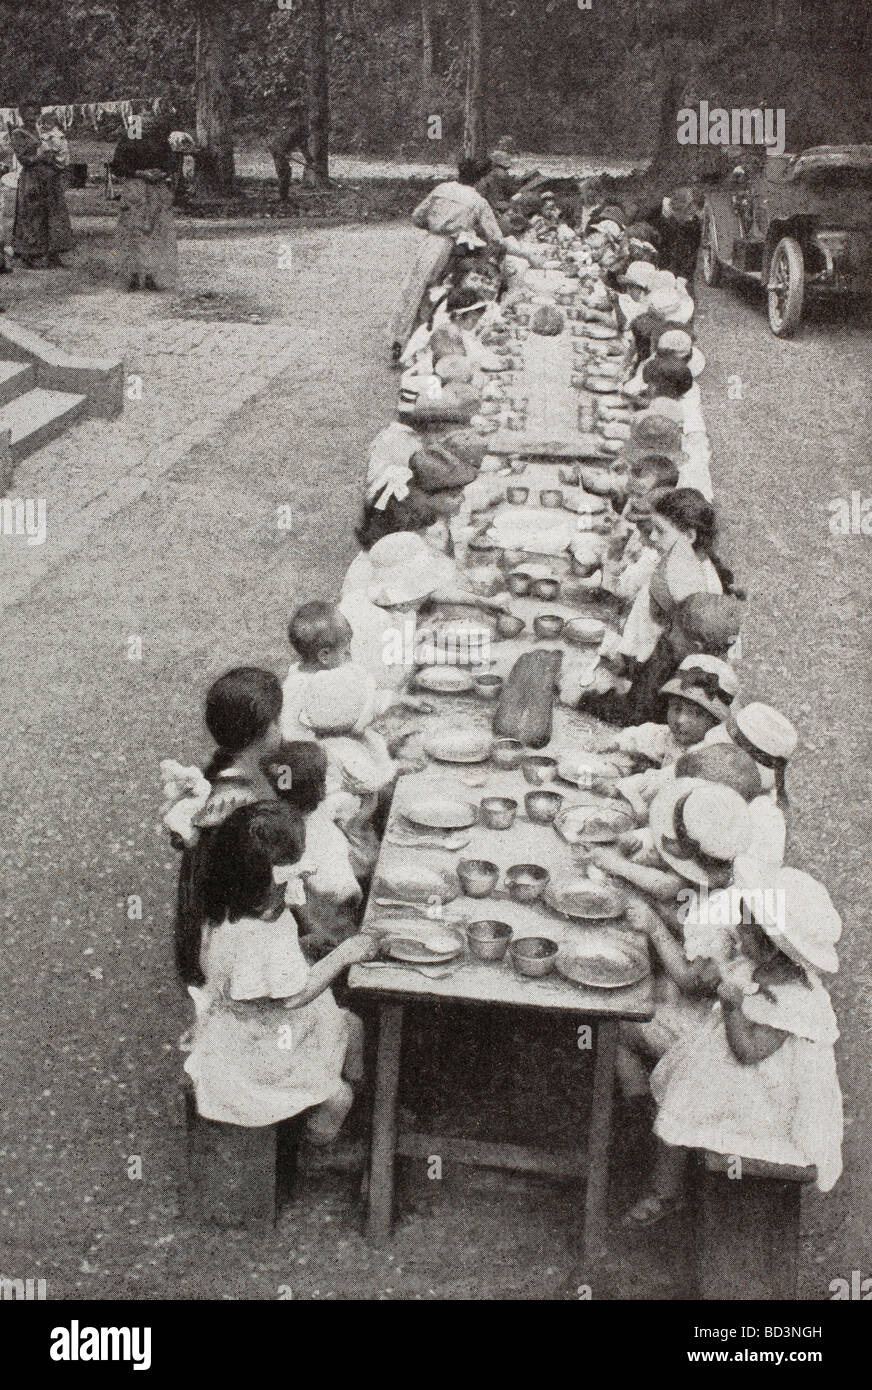 Orphans and refugee children being fed at the chateau de Grand Val in Sucy en Brie France during the First World War. Stock Photo